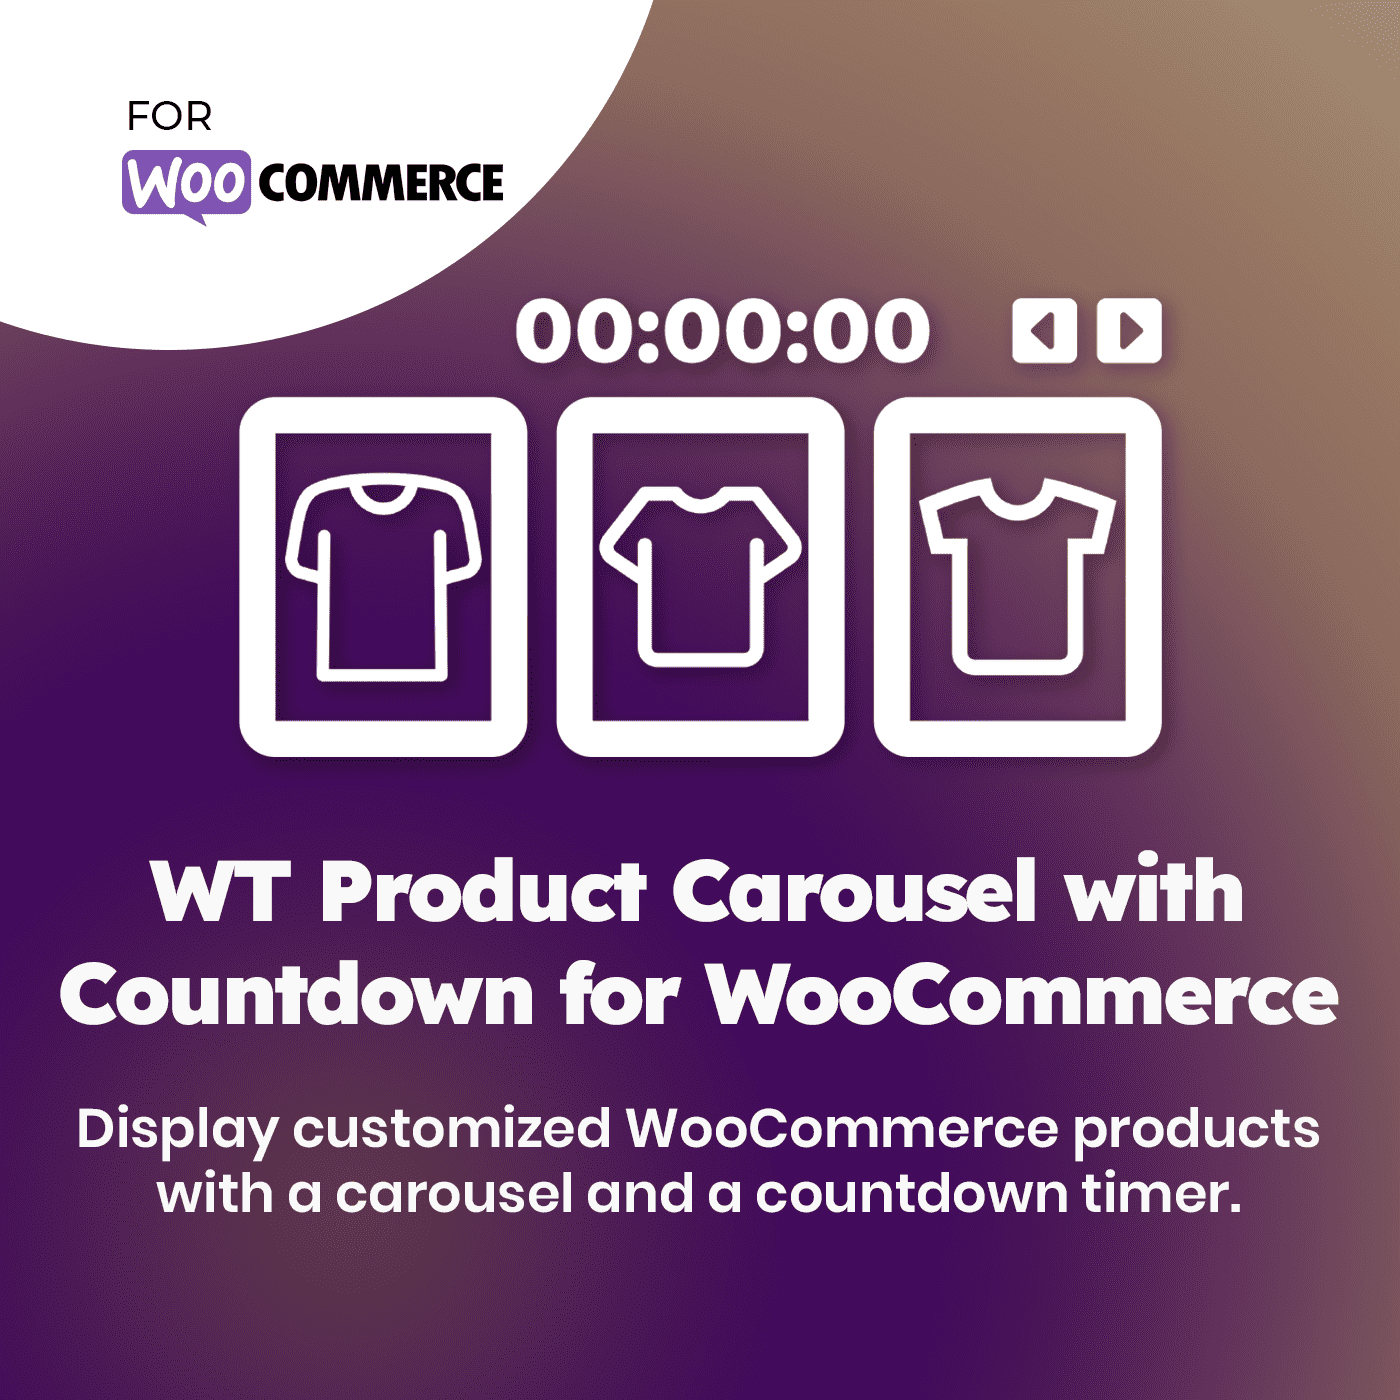 WT Product Carousel with Countdown for WooCommerce - WordPress Plugin for WooCommerce